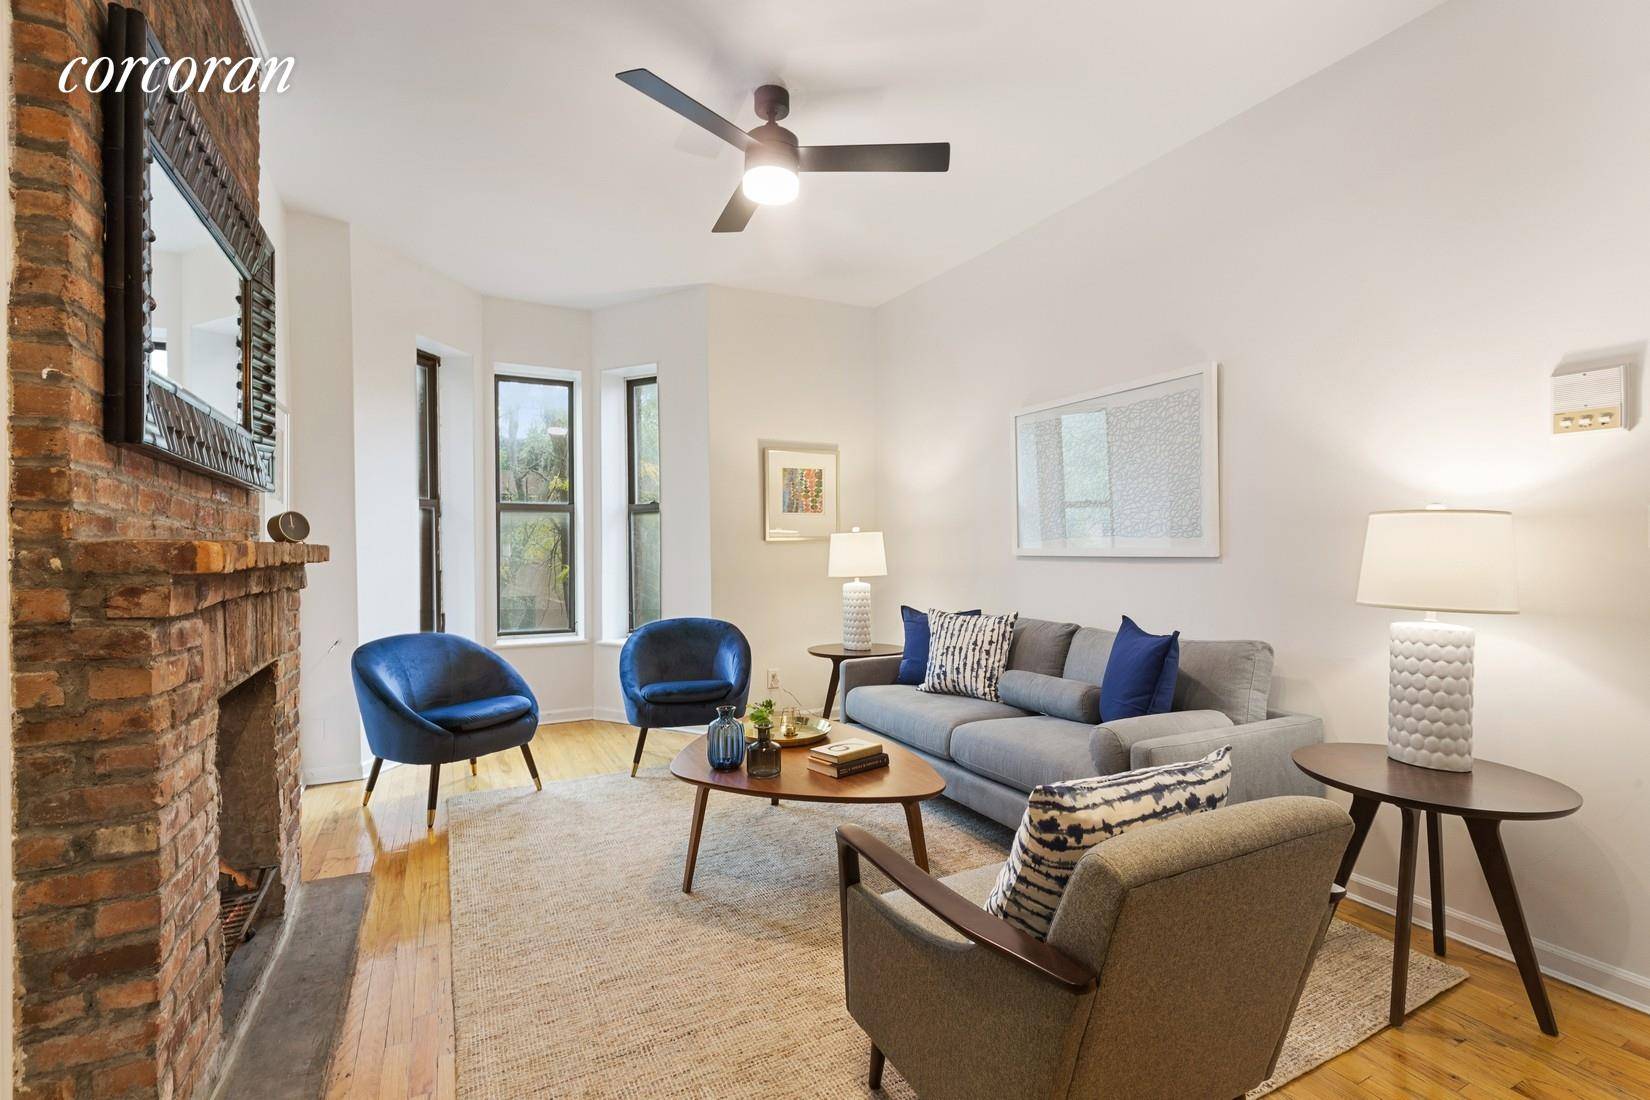 Gorgeous southern light, a working WOOD BURNING FIREPLACE, and generous closet space are just a few of the details that make this spacious one bedroom, pre war CONDO so special.